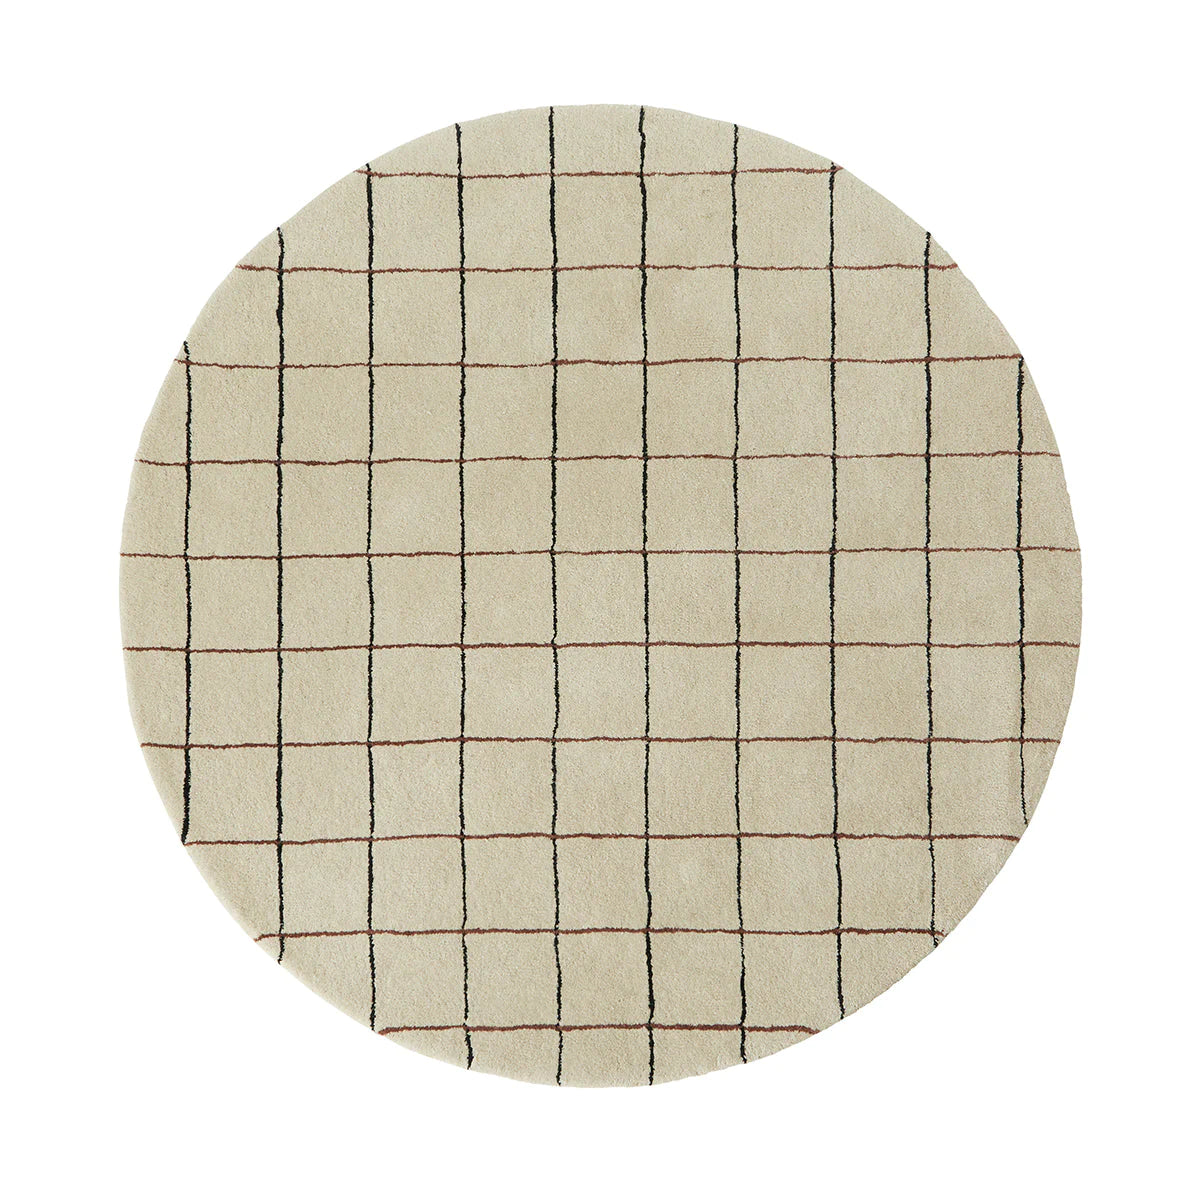 OYOY round and grid carpet